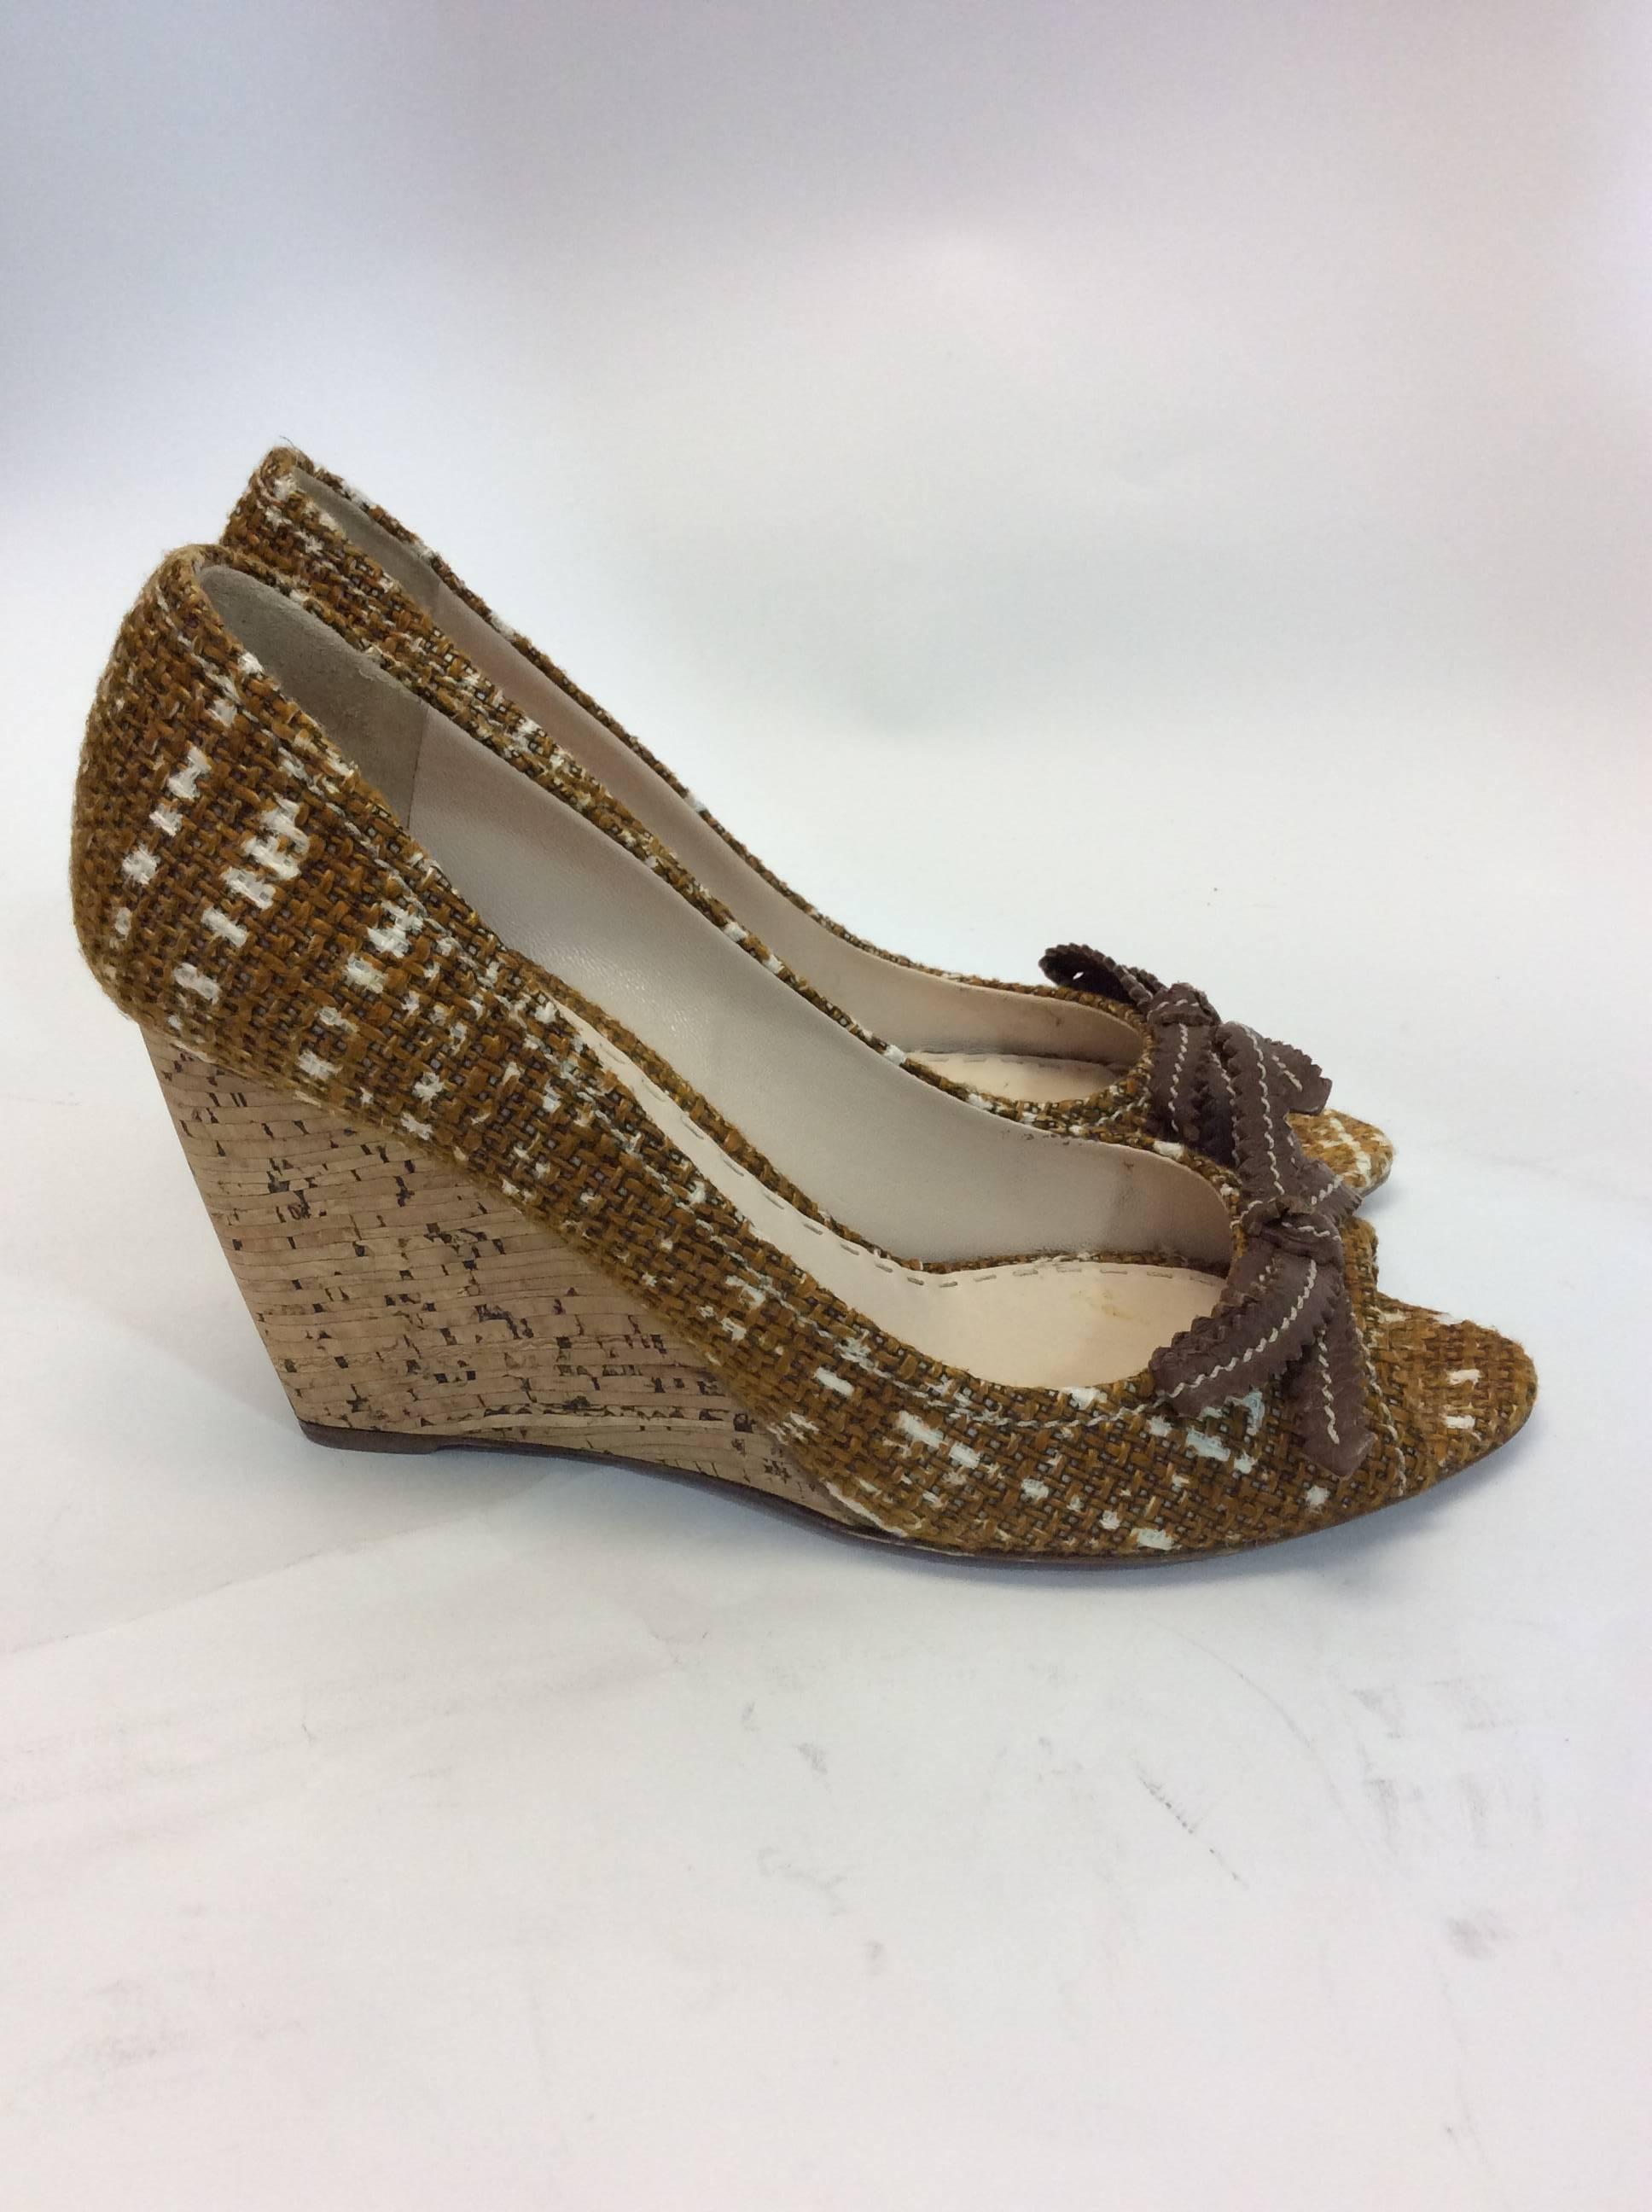 Prada Tweed Peep Toe Wedge In Excellent Condition For Sale In Narberth, PA